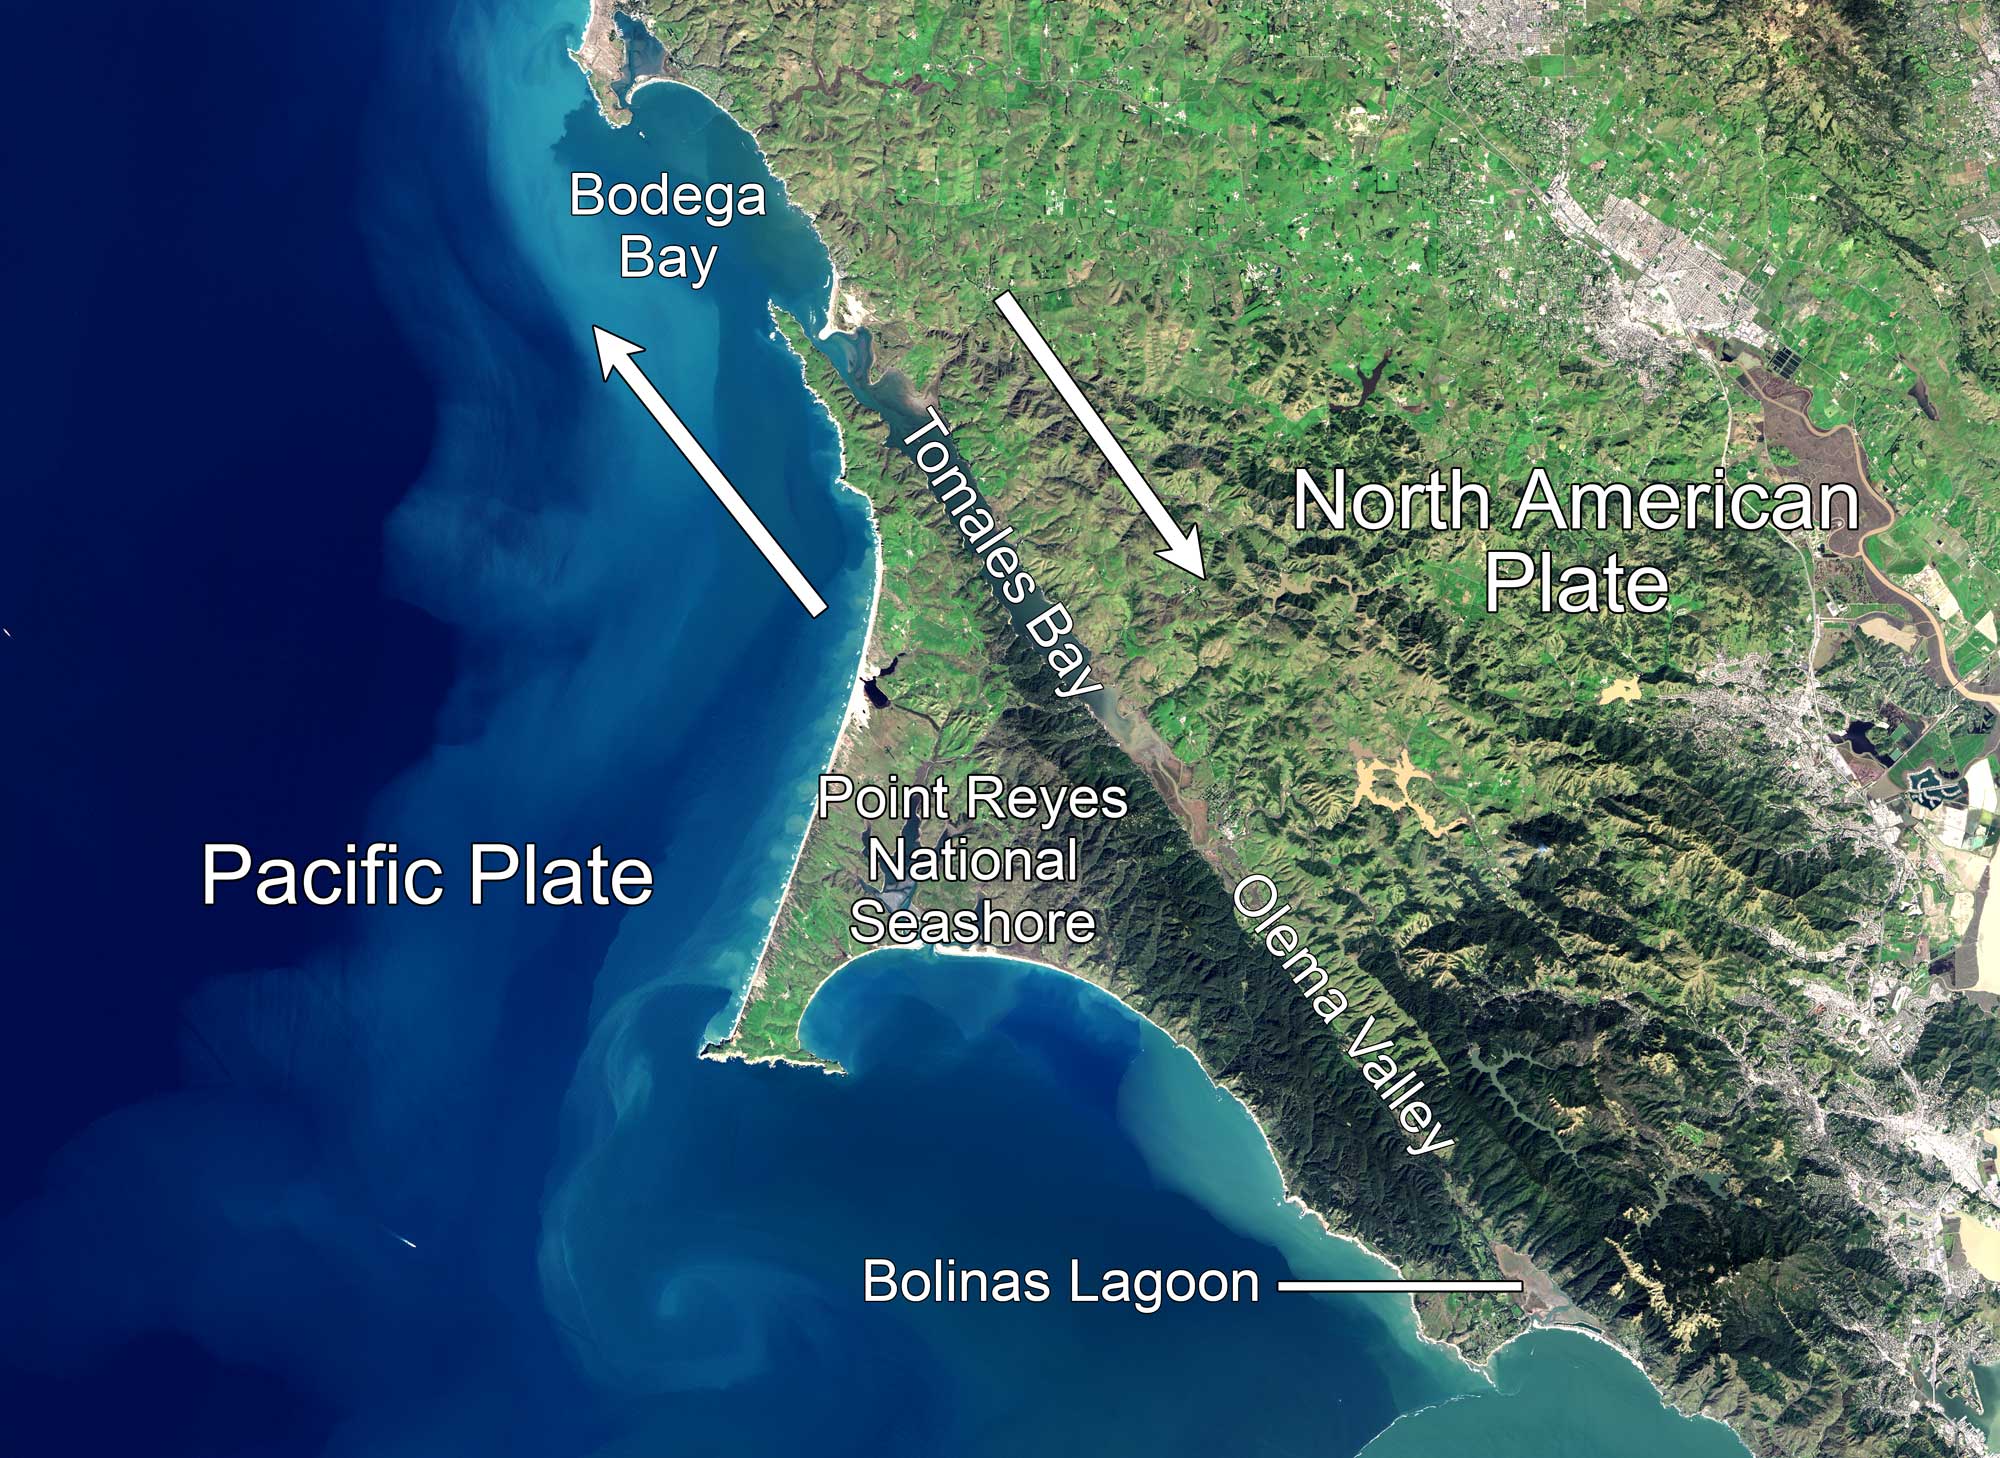 Satellite image of the Central California coast showing Bodega Bay and Point Reyes. In the photo, the San Andreas Fault can clearly be seen as a northeast-southwest trending valley cutting across the land. To the left is the Pacific Plate, which is moving northwest. To the right is the North American Plate.